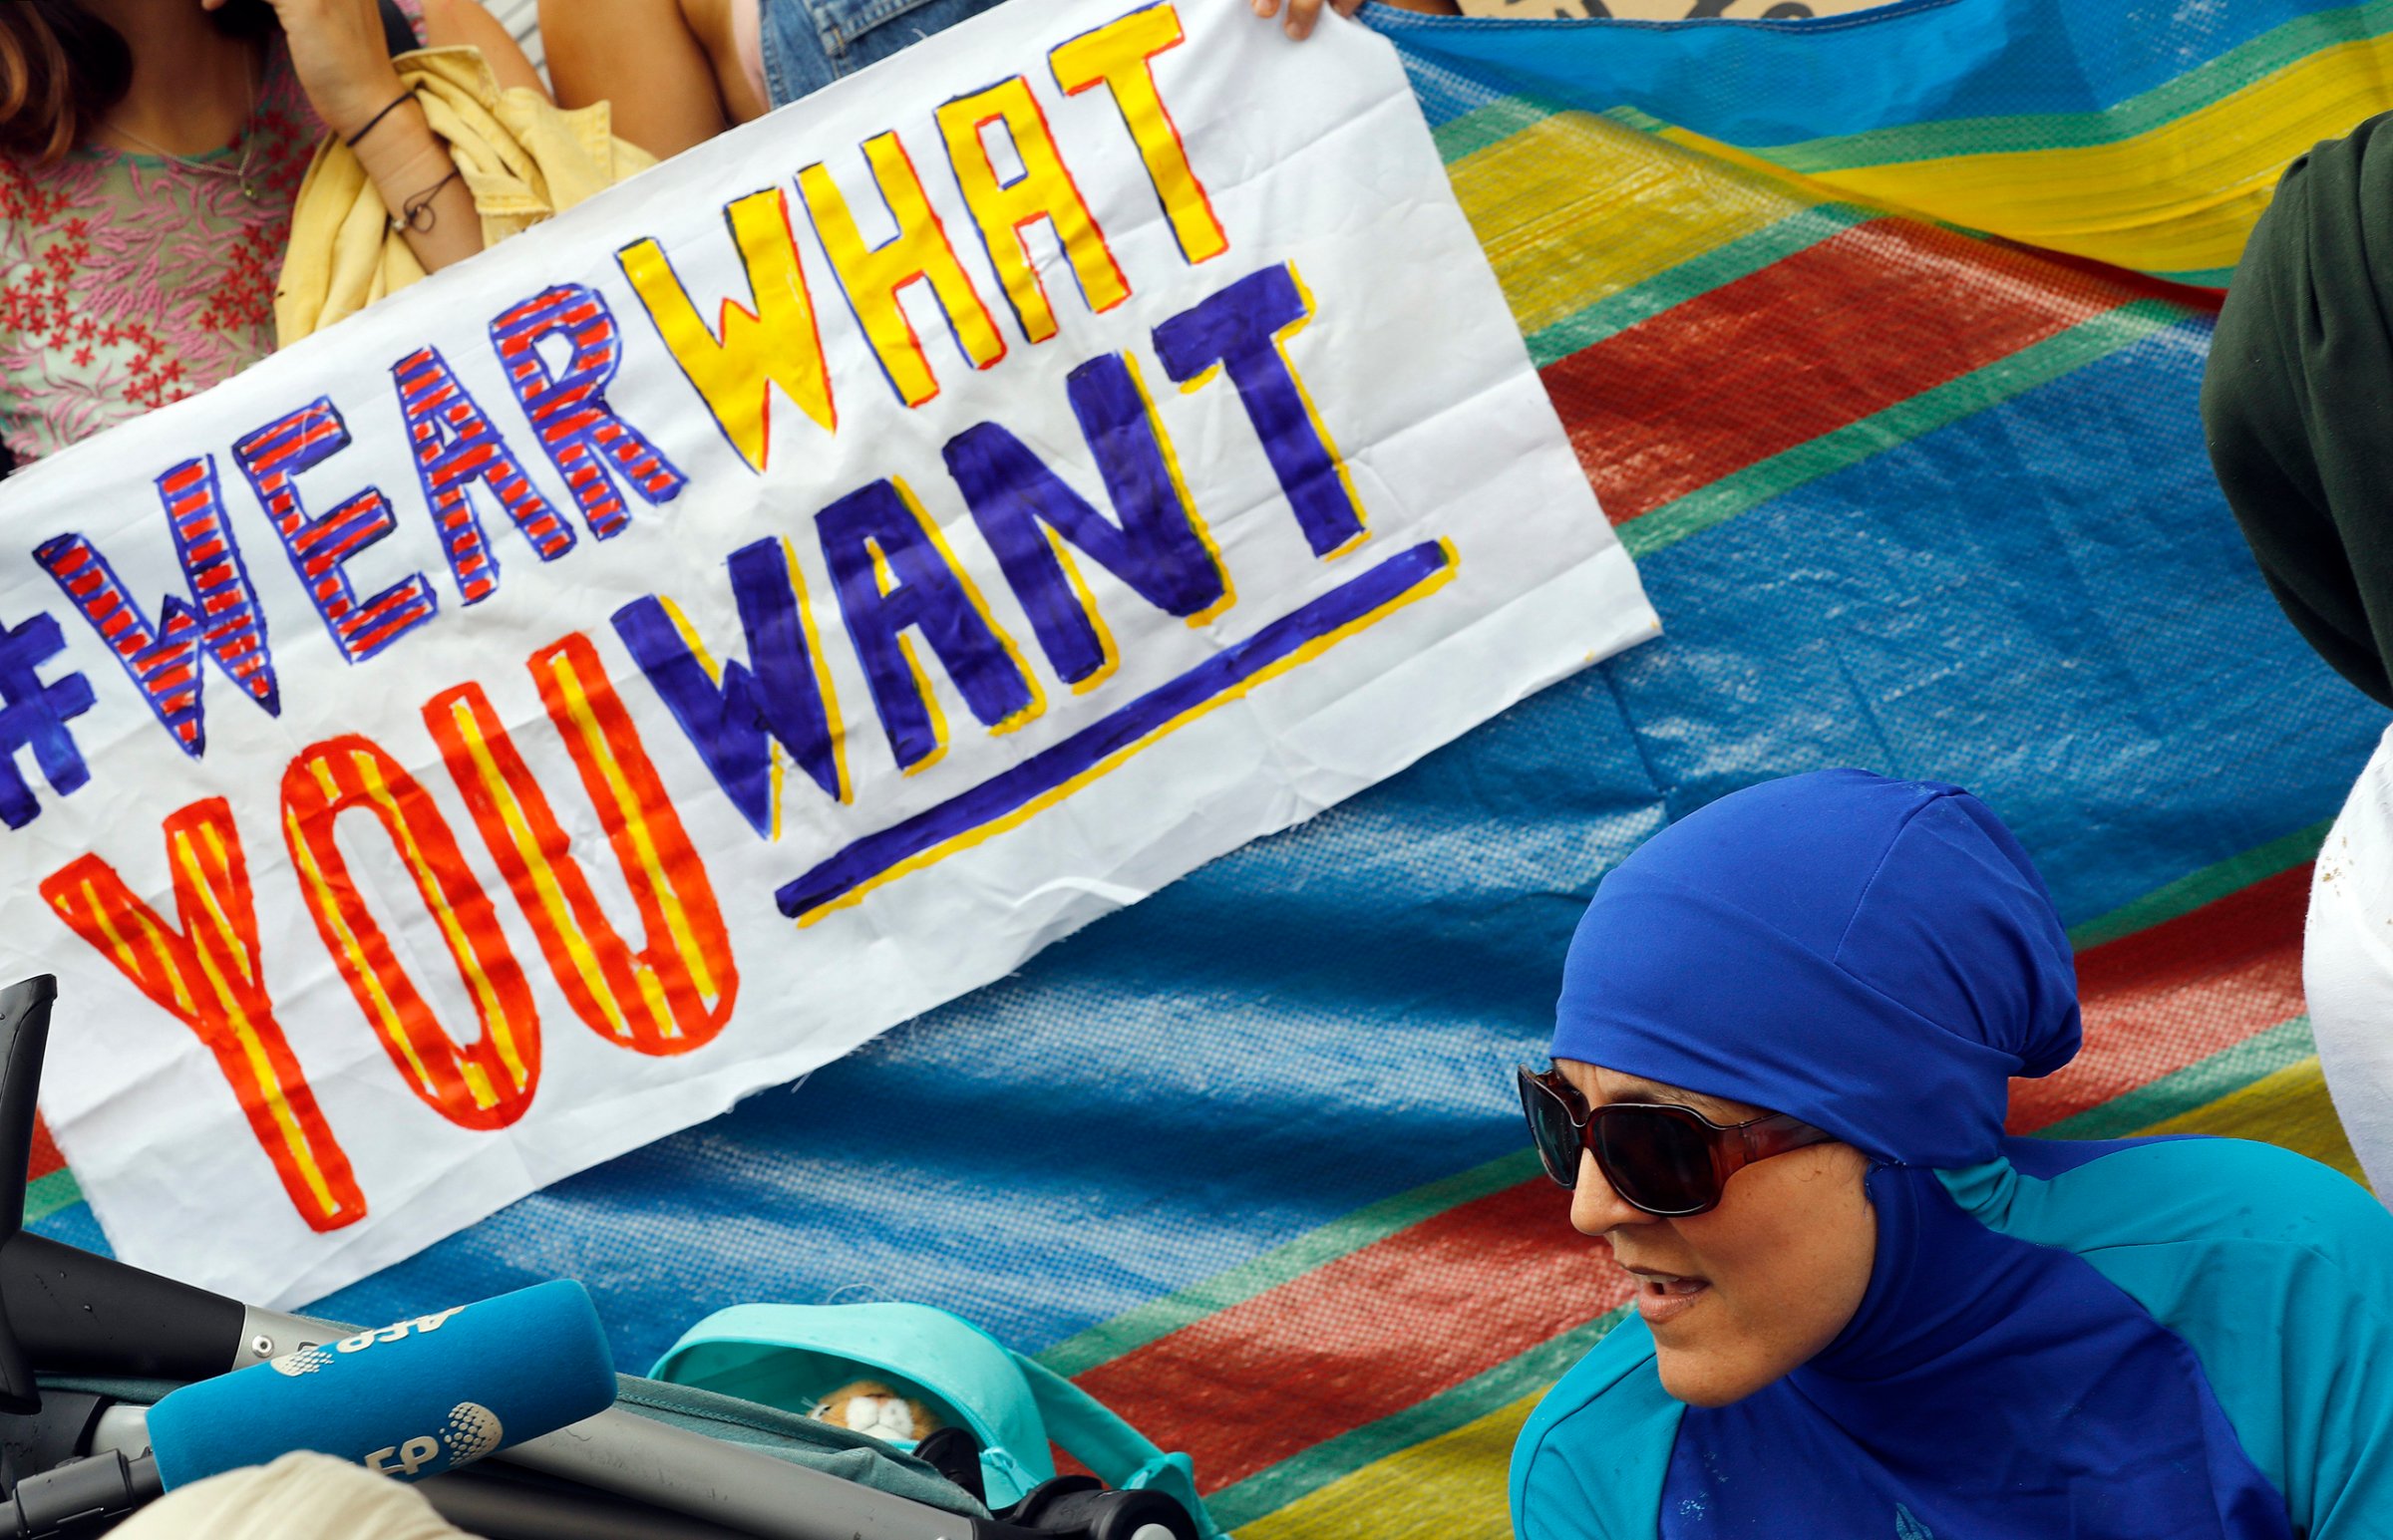 An activist protests outside the French embassy during, the "wear what you want beach party" in London, on Aug. 25, 2016.